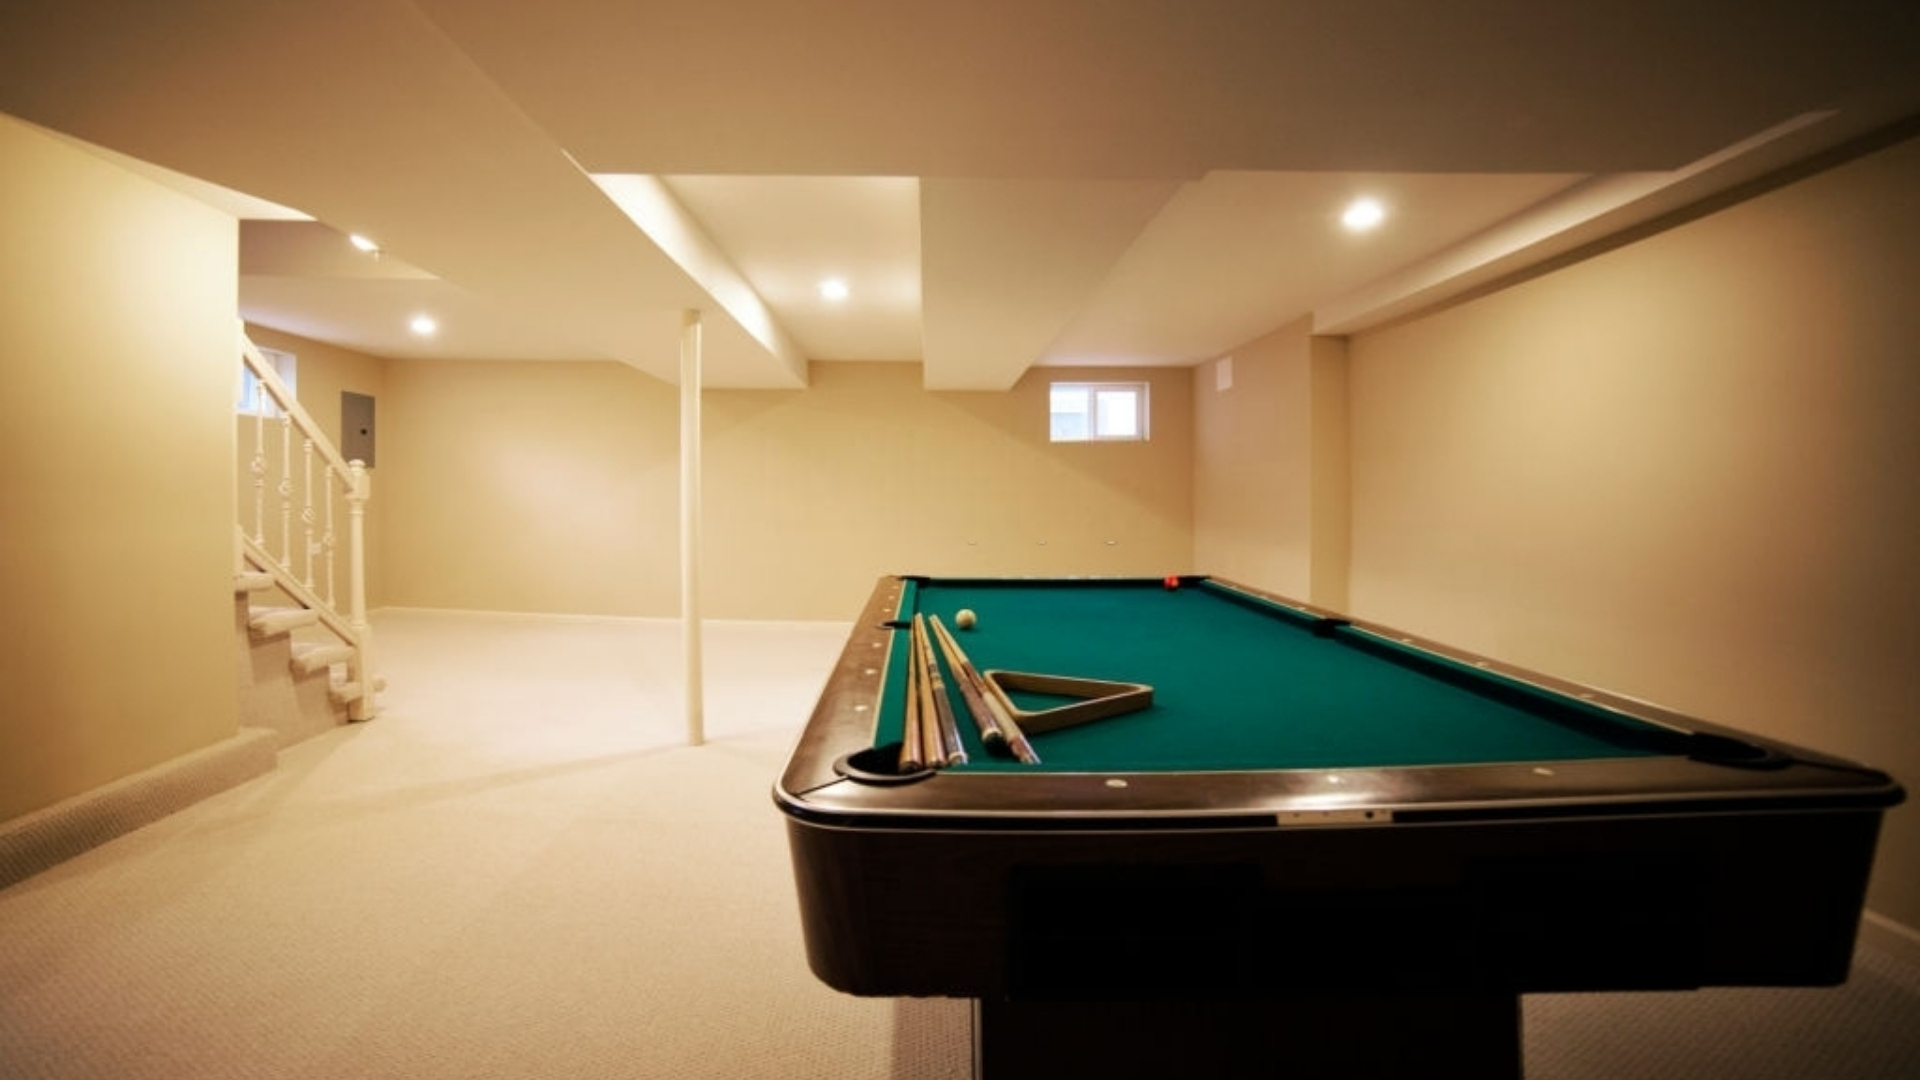 From the Ground Up: The Timeline of a Basement Renovation